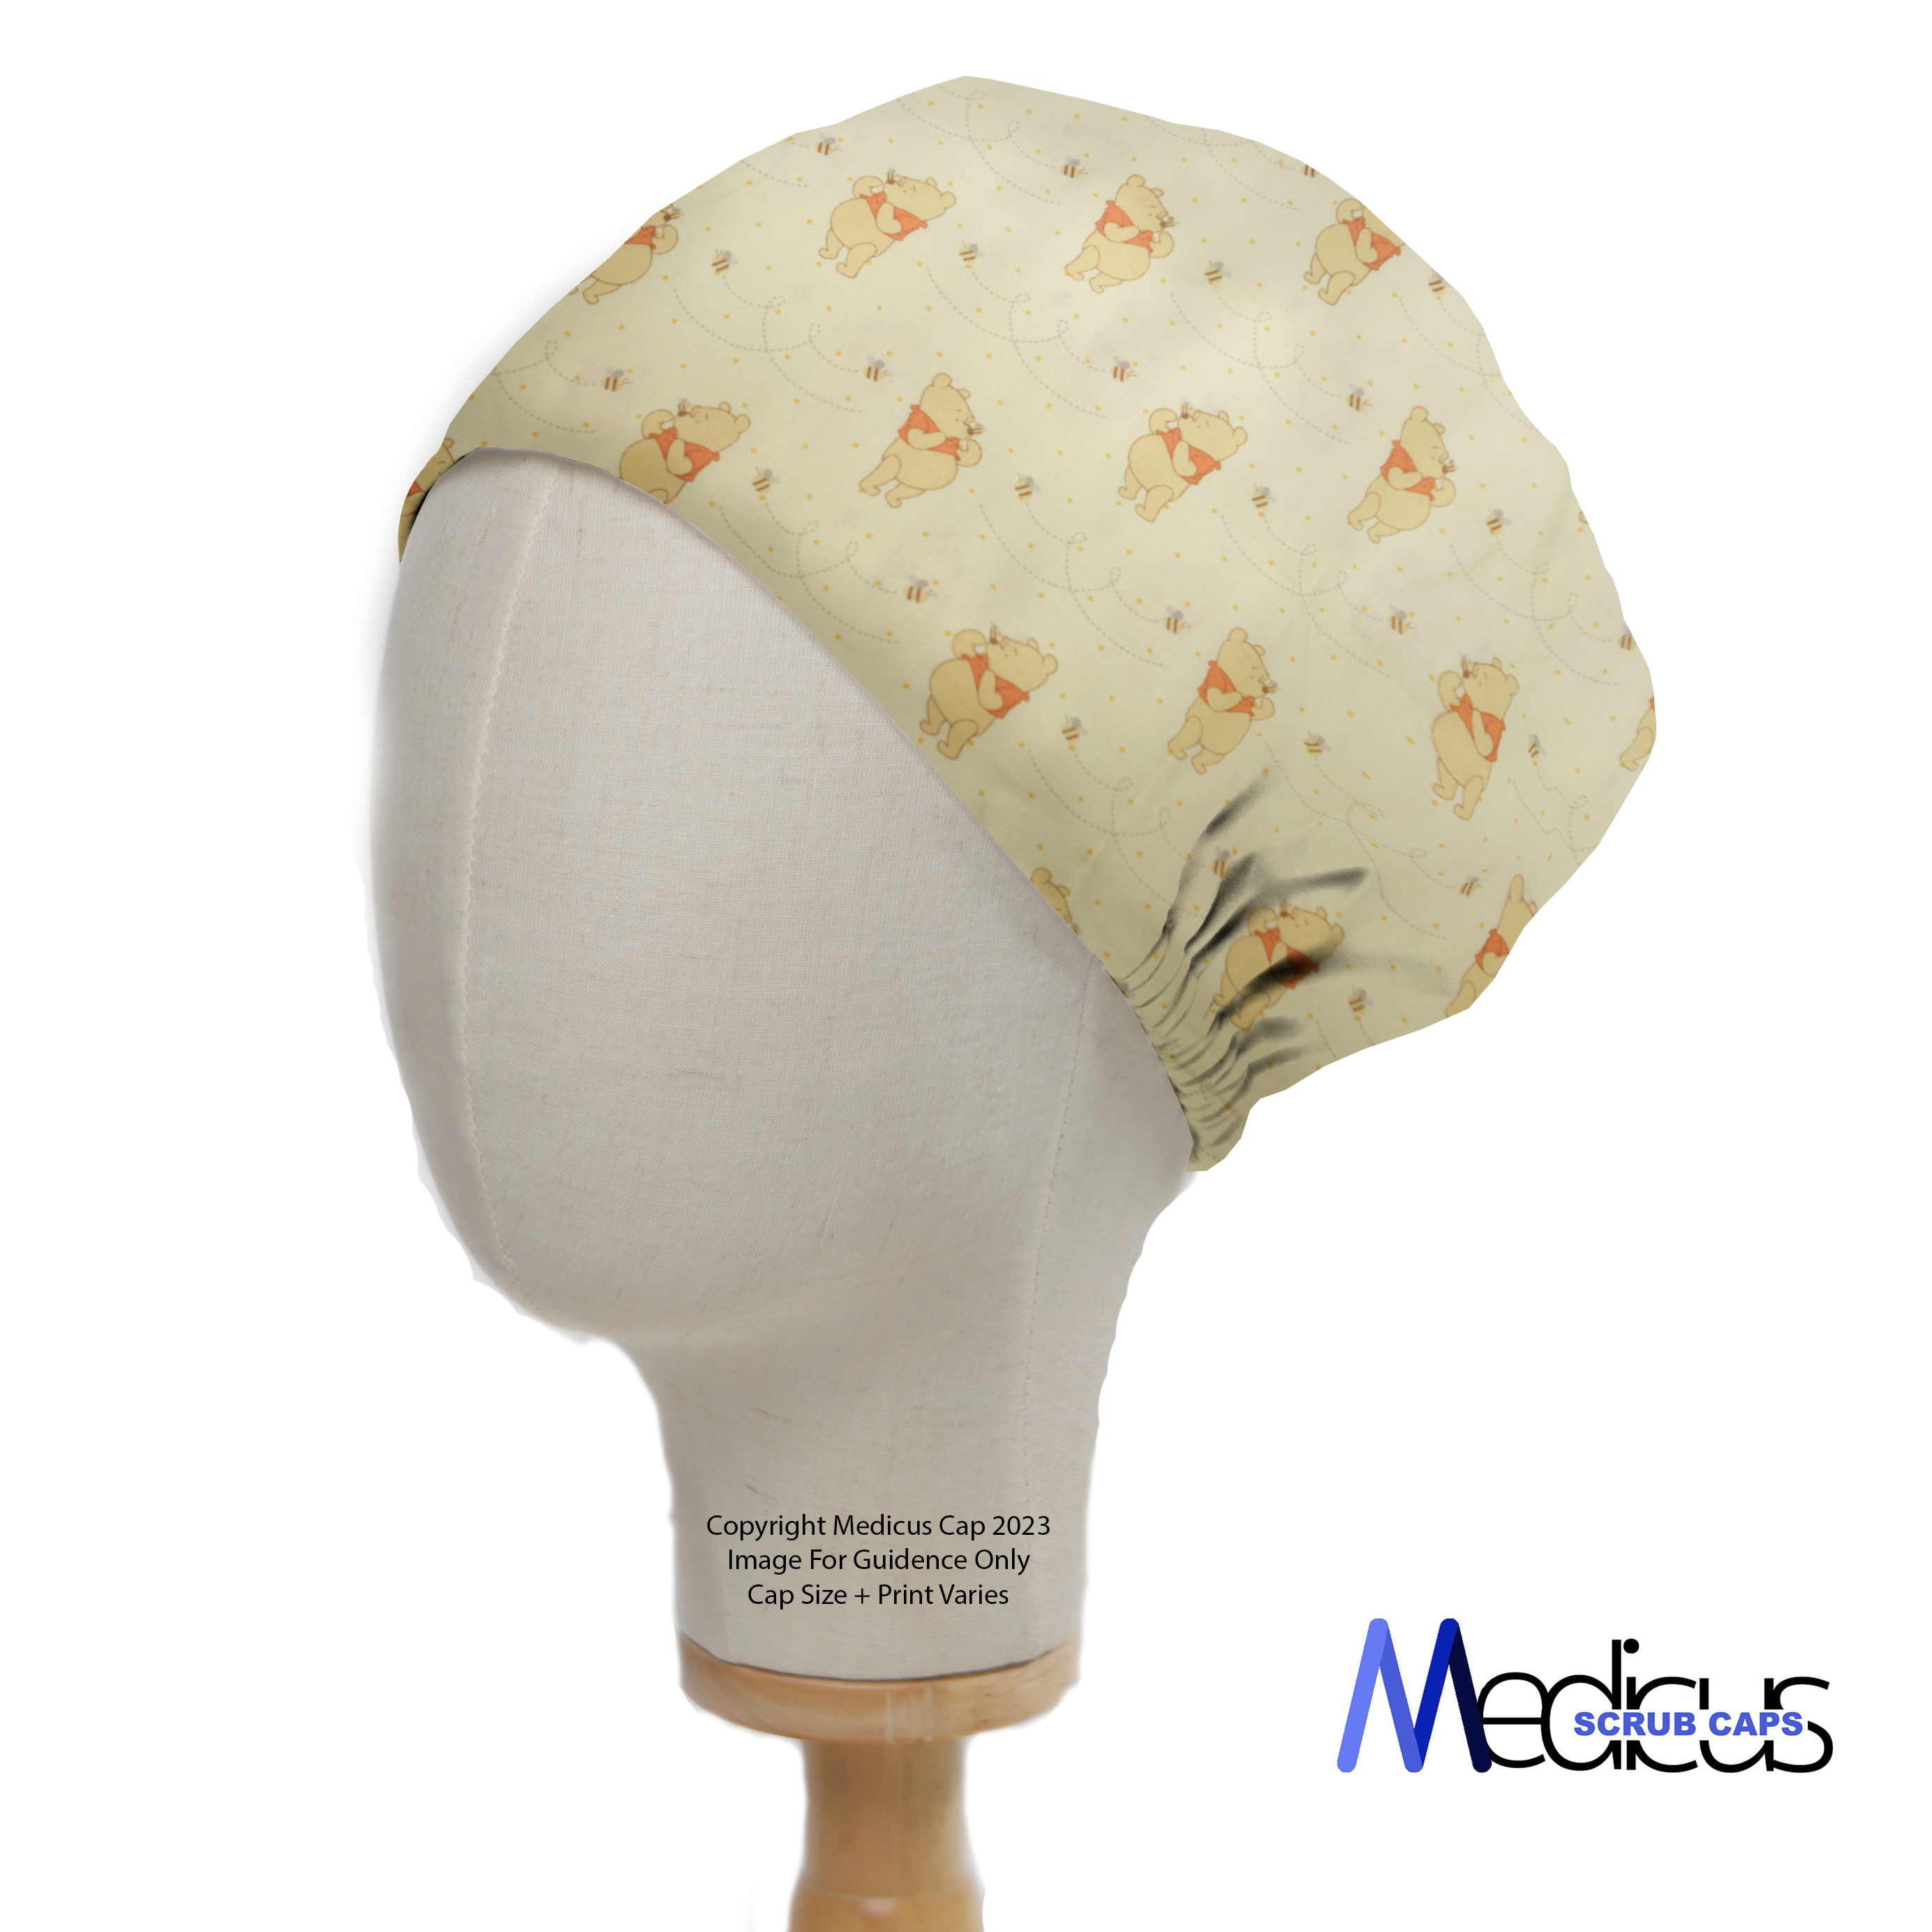 Winnie The Pooh Honey + Bees Scrub Cap - Scrub Cap from Medicus Scrub Caps - Shop now at Medicus Scrub Caps - all, Animals, Bears, new-arrivals, Patterned Scrub Caps, scrub cap, Winnie The Pooh